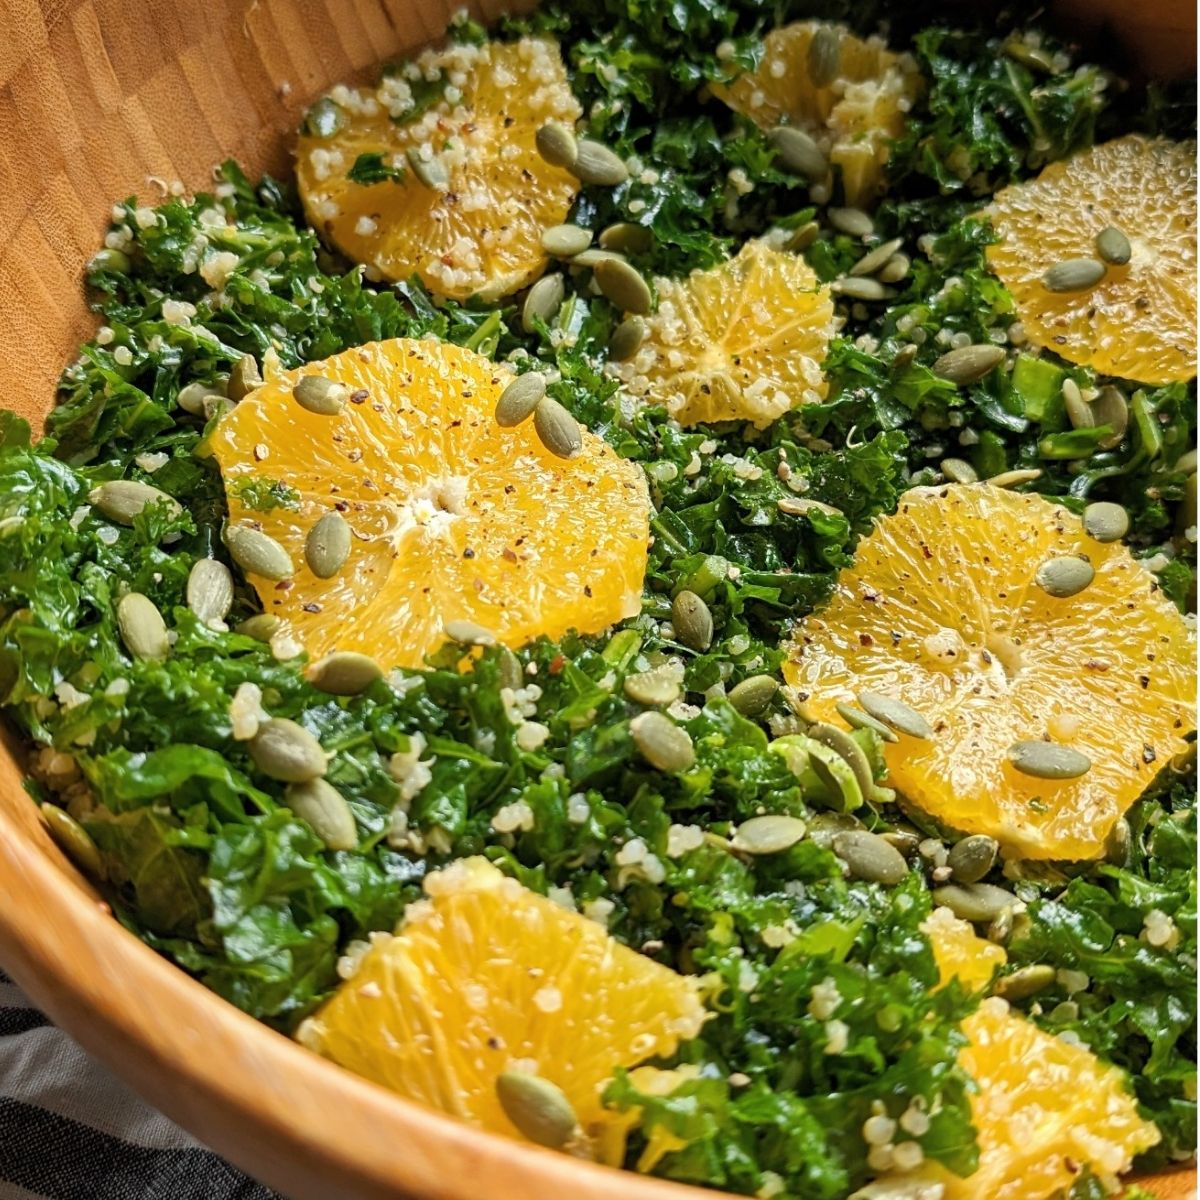 the best vegan kale salad recipe with oranges and quinoa with a homemade dressing